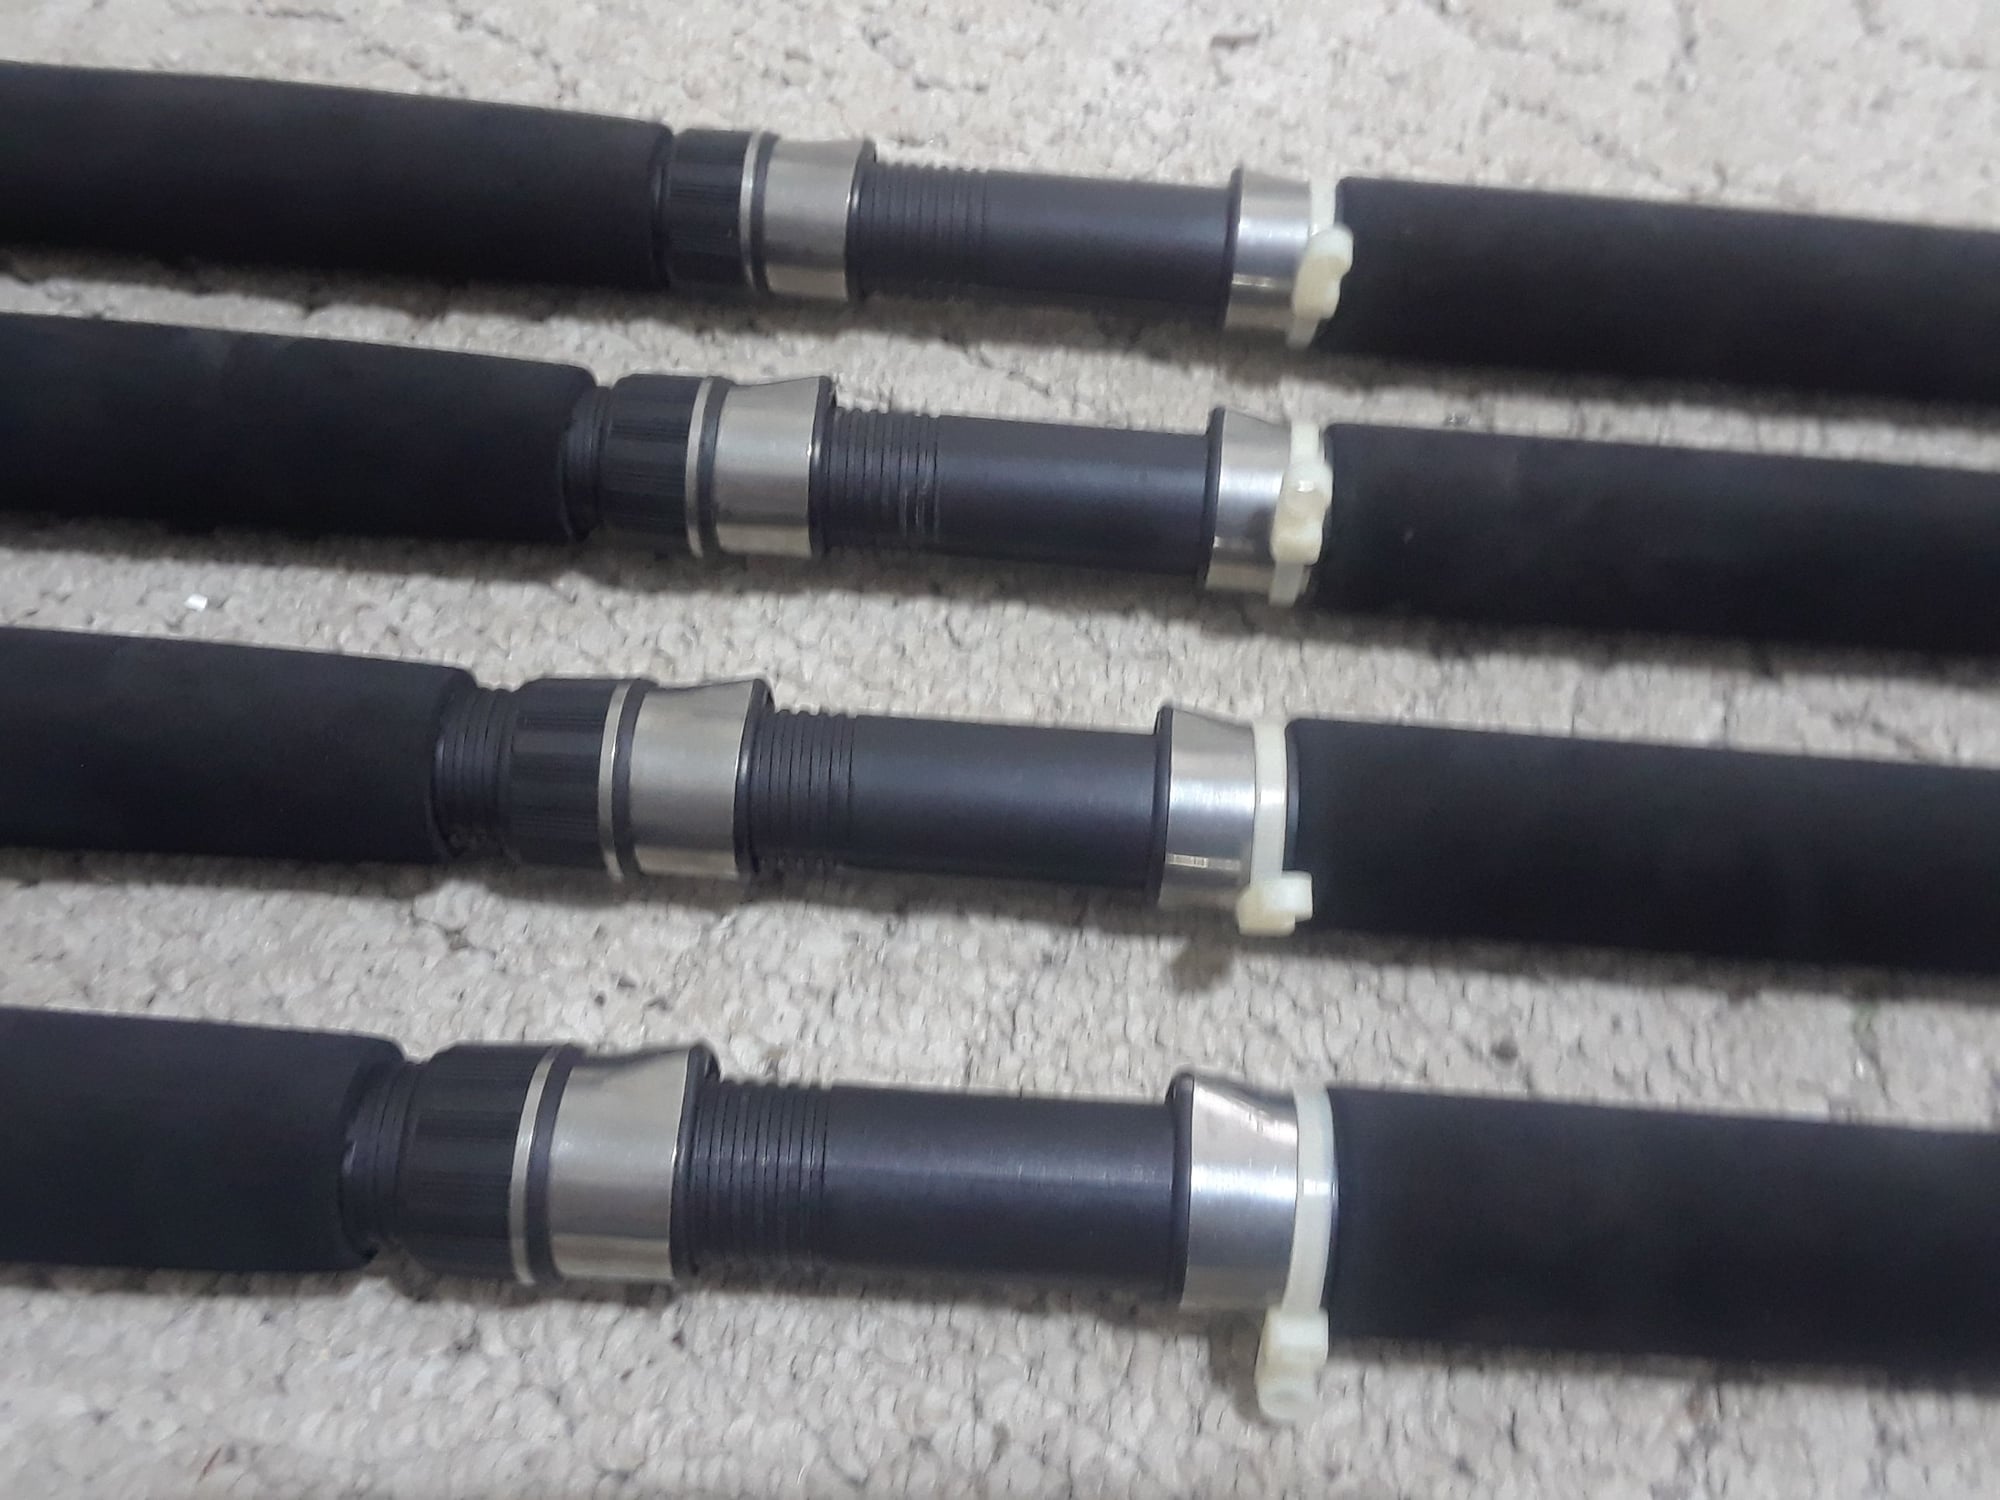 Star, ugly stik, rod sale for n.e. Florida - The Hull Truth